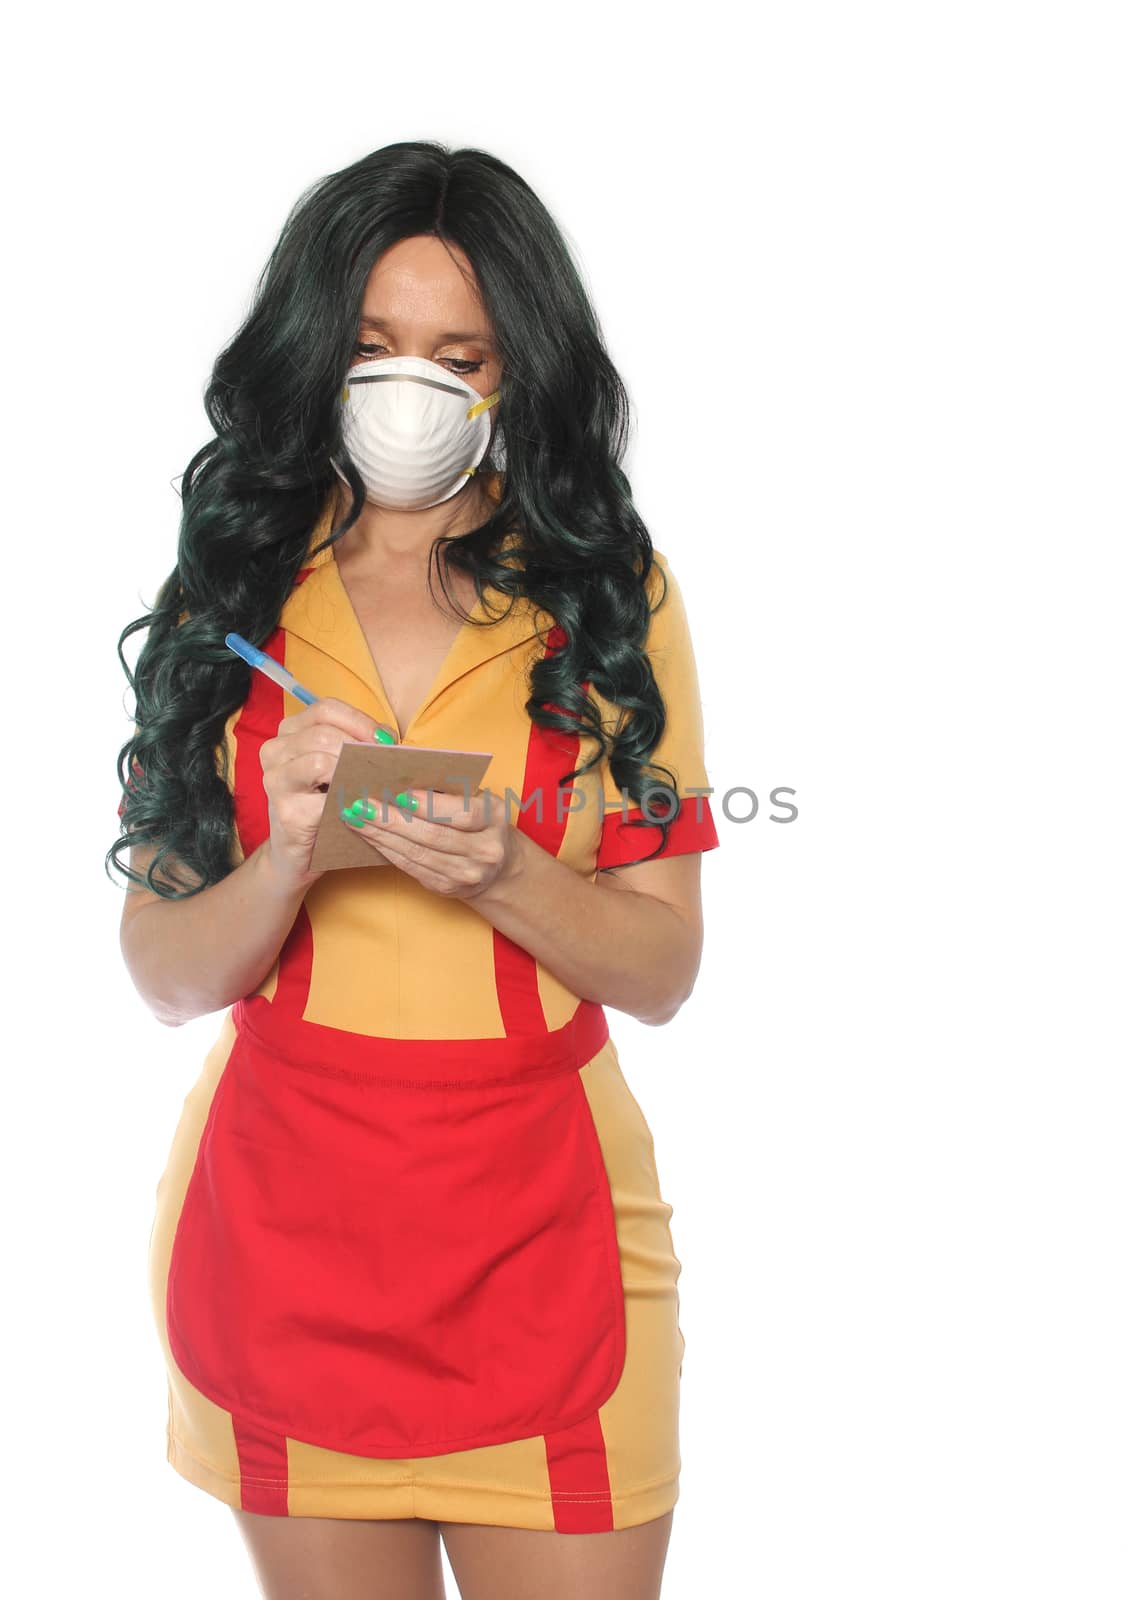 Restaurant and Bar Waitress Wearing Face Mask To Prevent illness by Marti157900